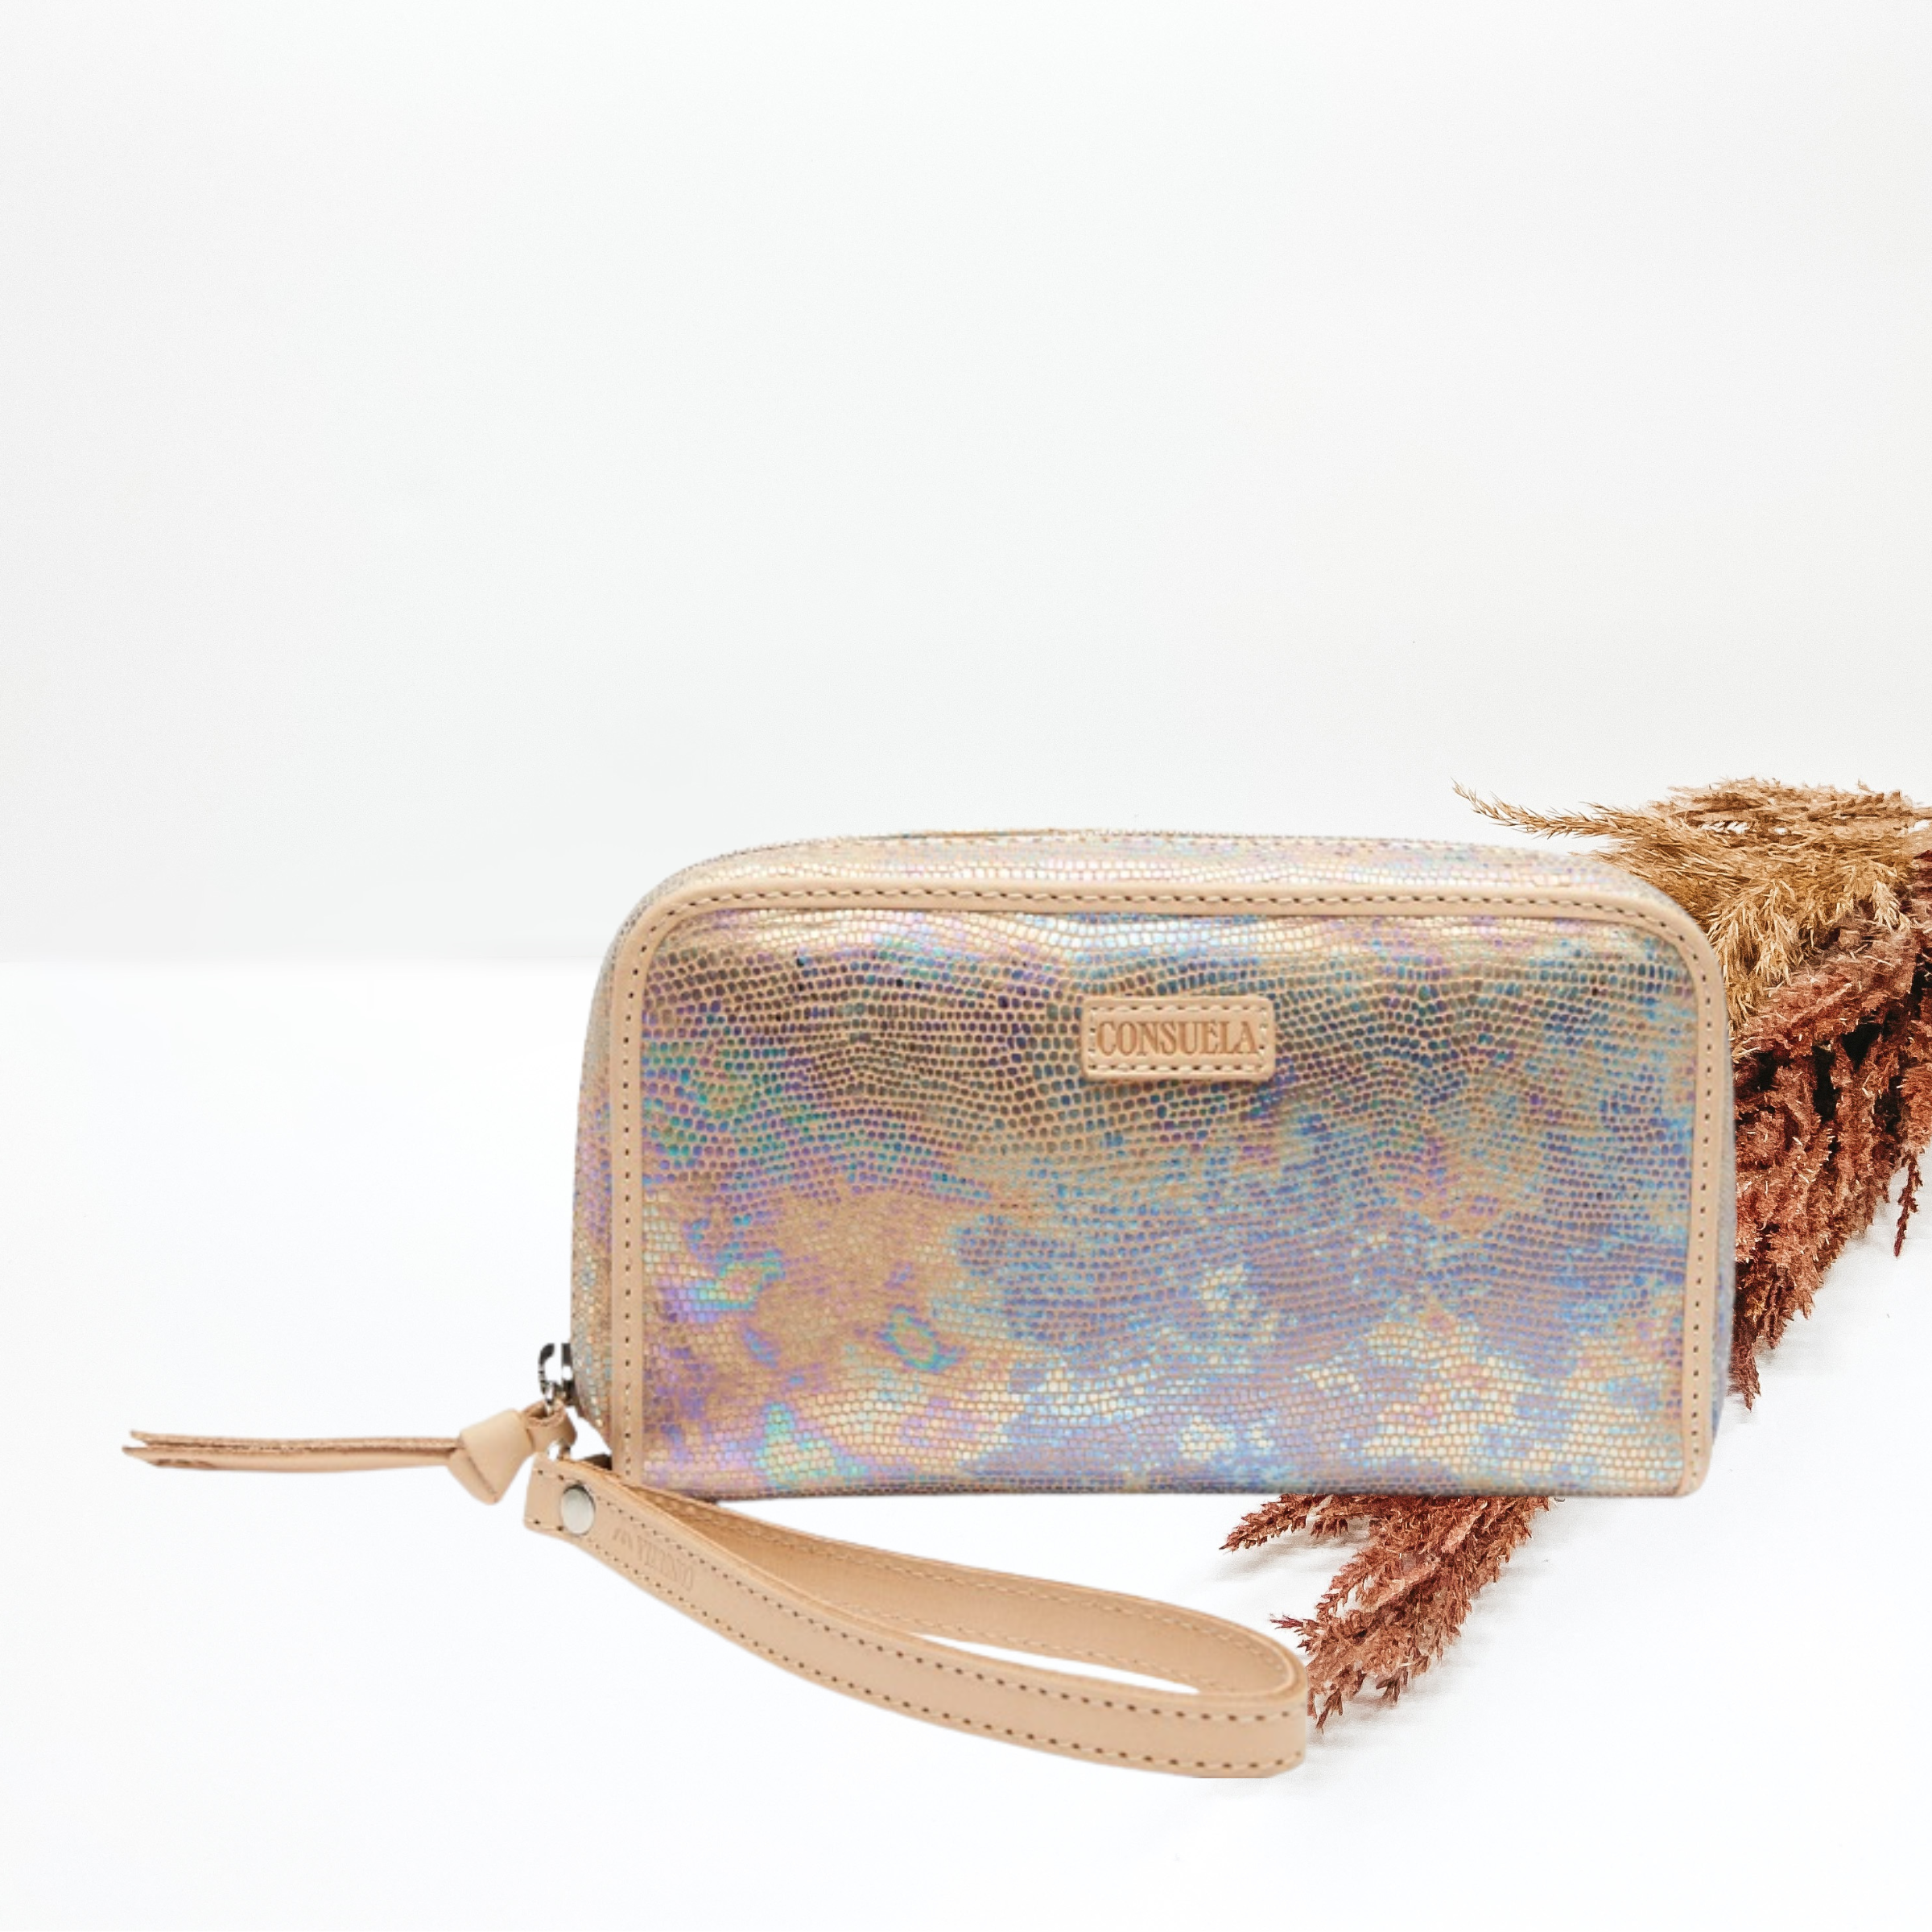 In the middle of the picture is a wristlet wallet in a iridescent color. Background is solid white with decorative florals just to the right of the wallet.  